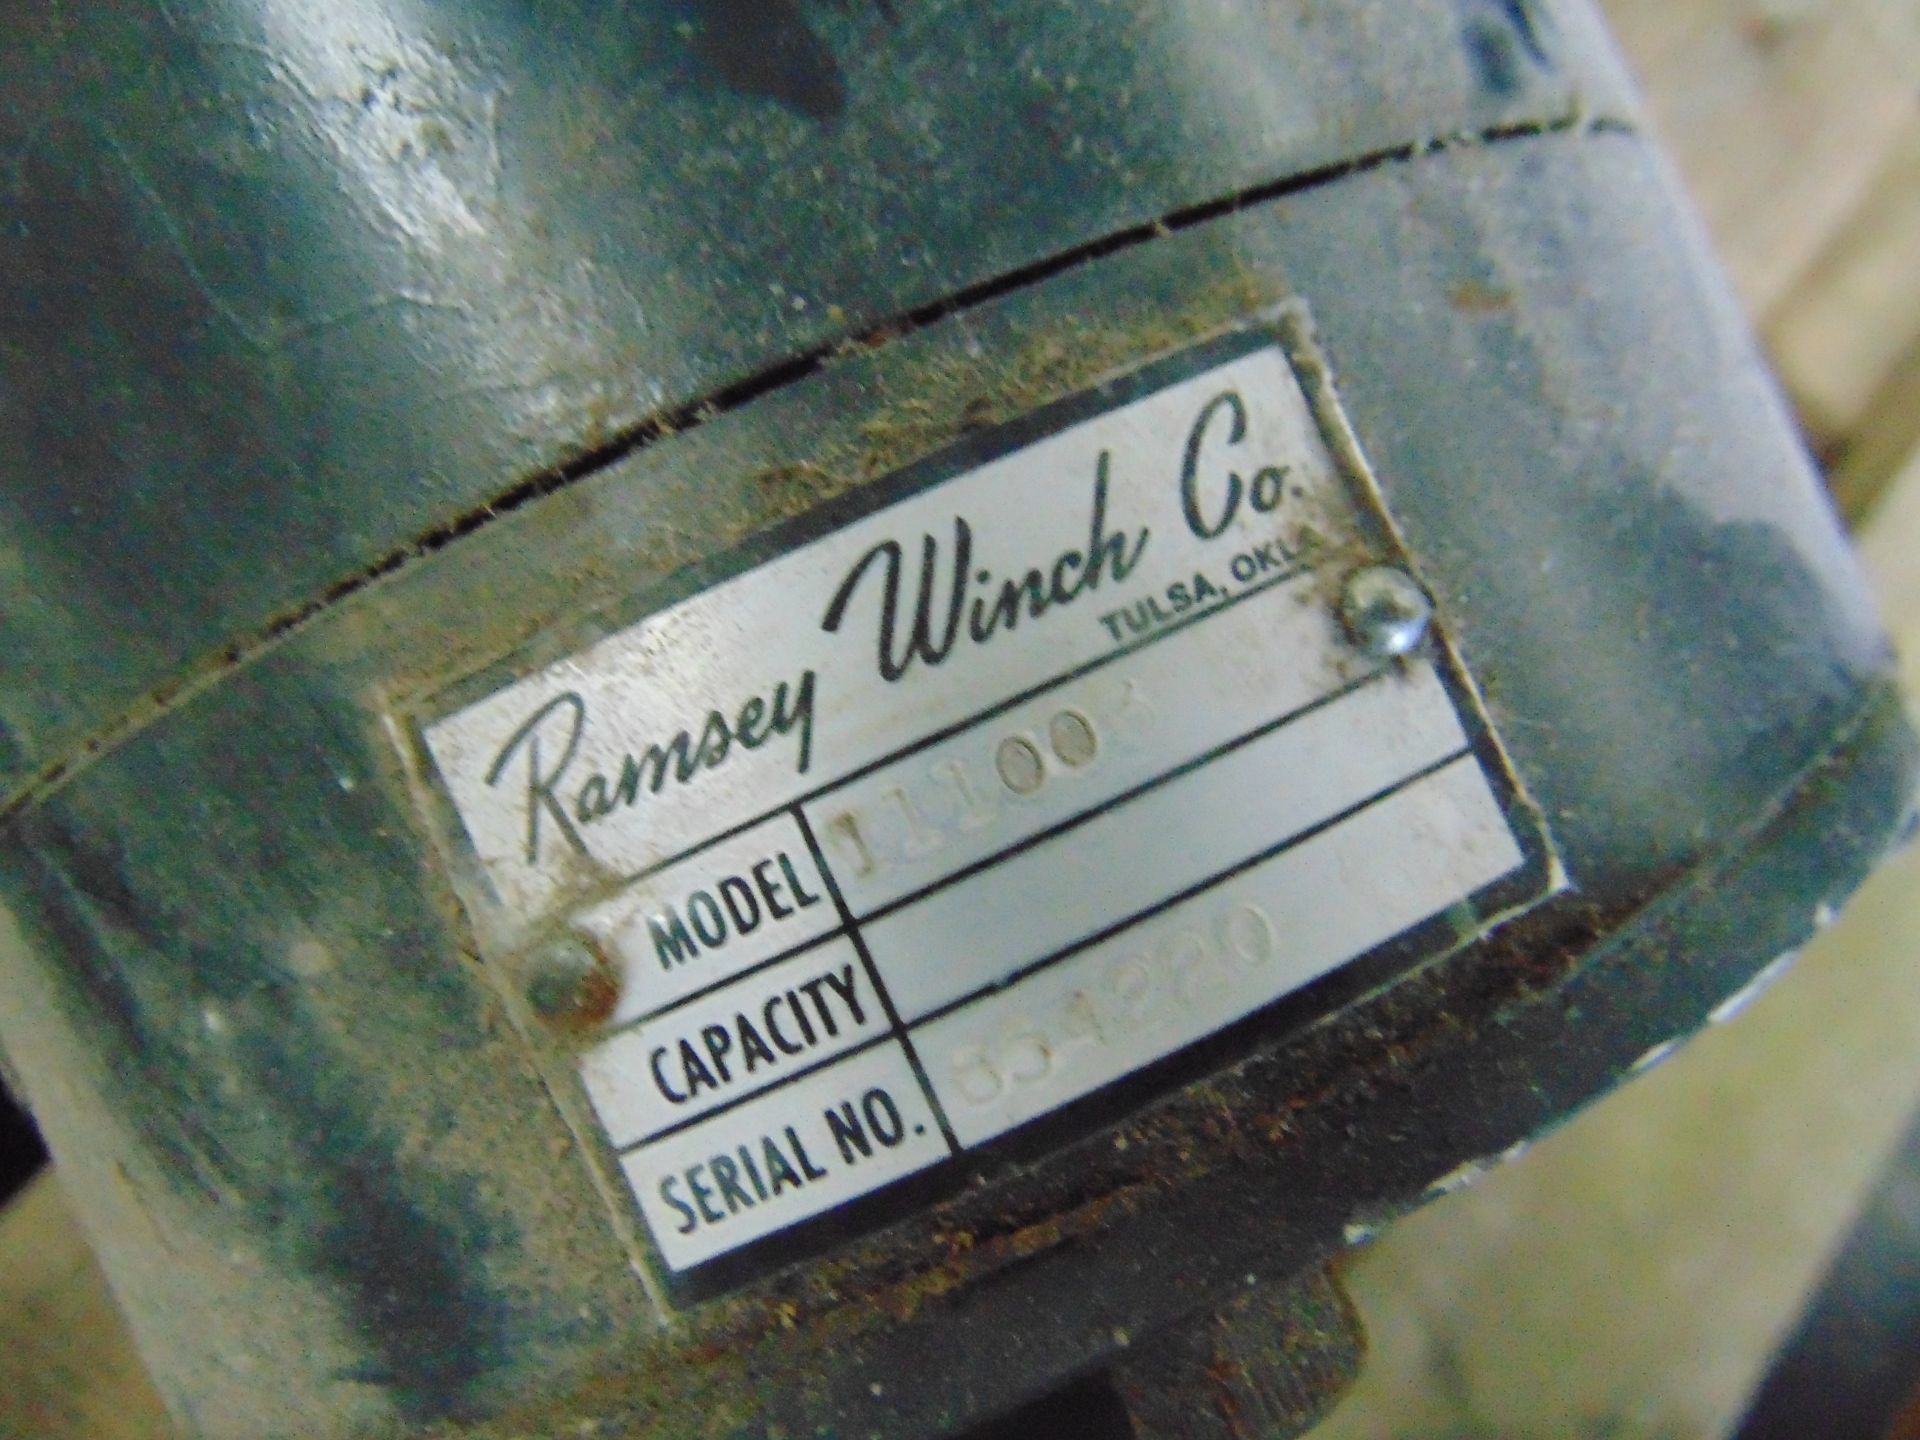 Ramsey Winch - Image 3 of 3